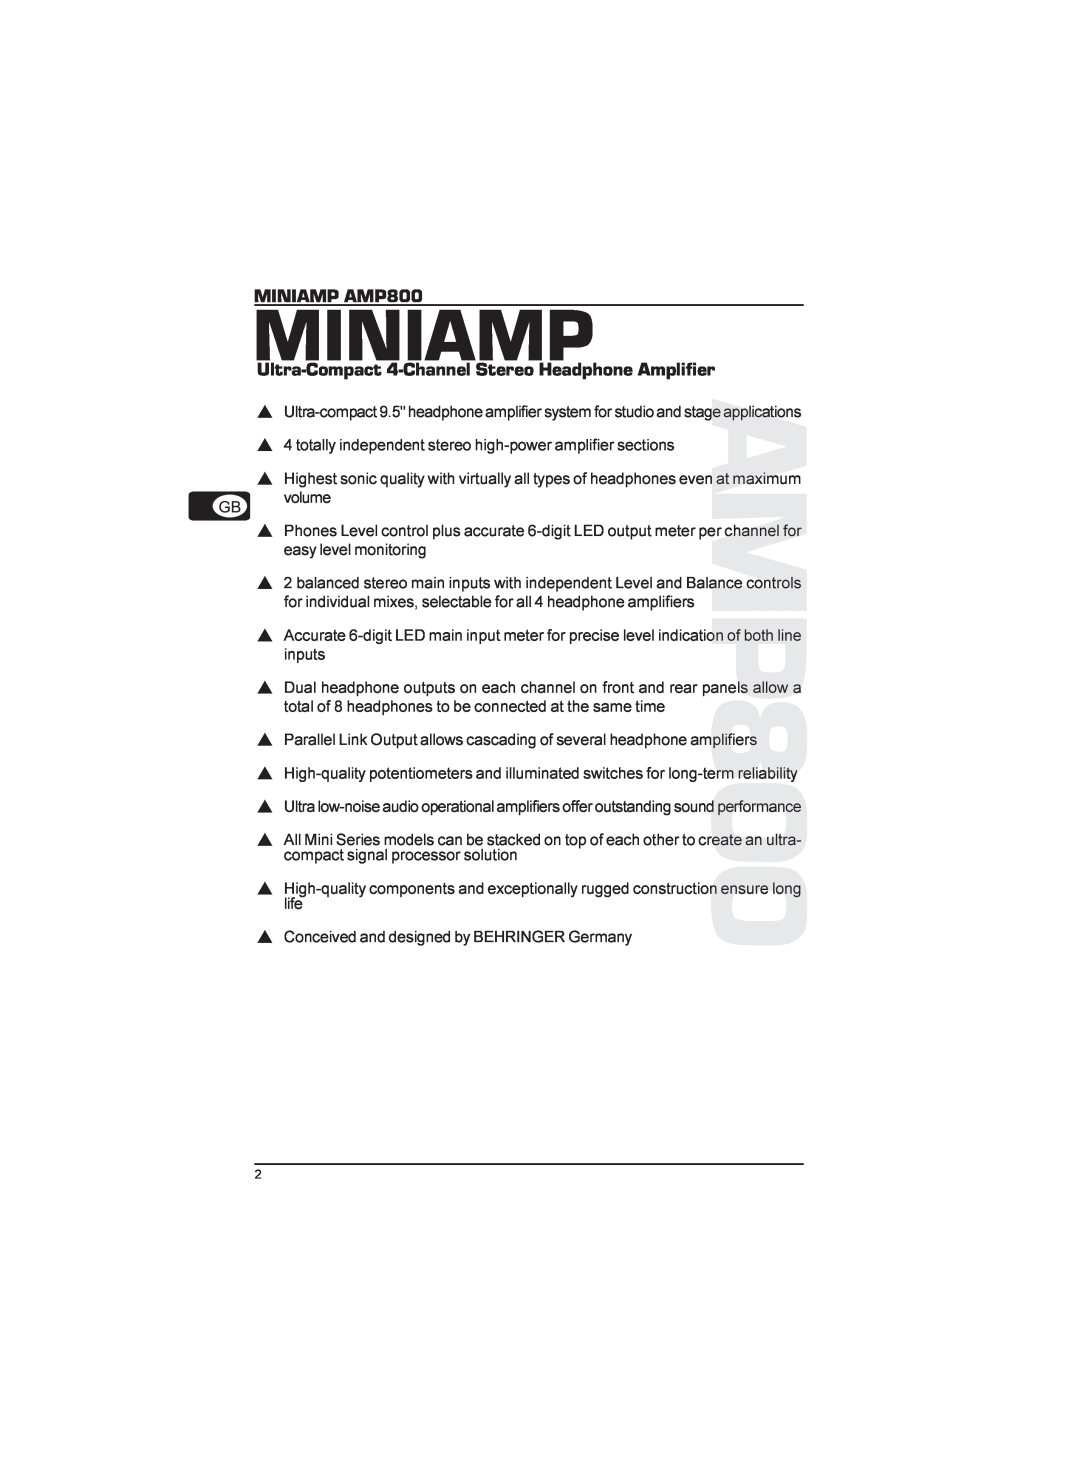 Behringer technical specifications MINIAMP AMP800, Ultra-Compact 4-ChannelStereo Headphone Amplifier, Miniamp 